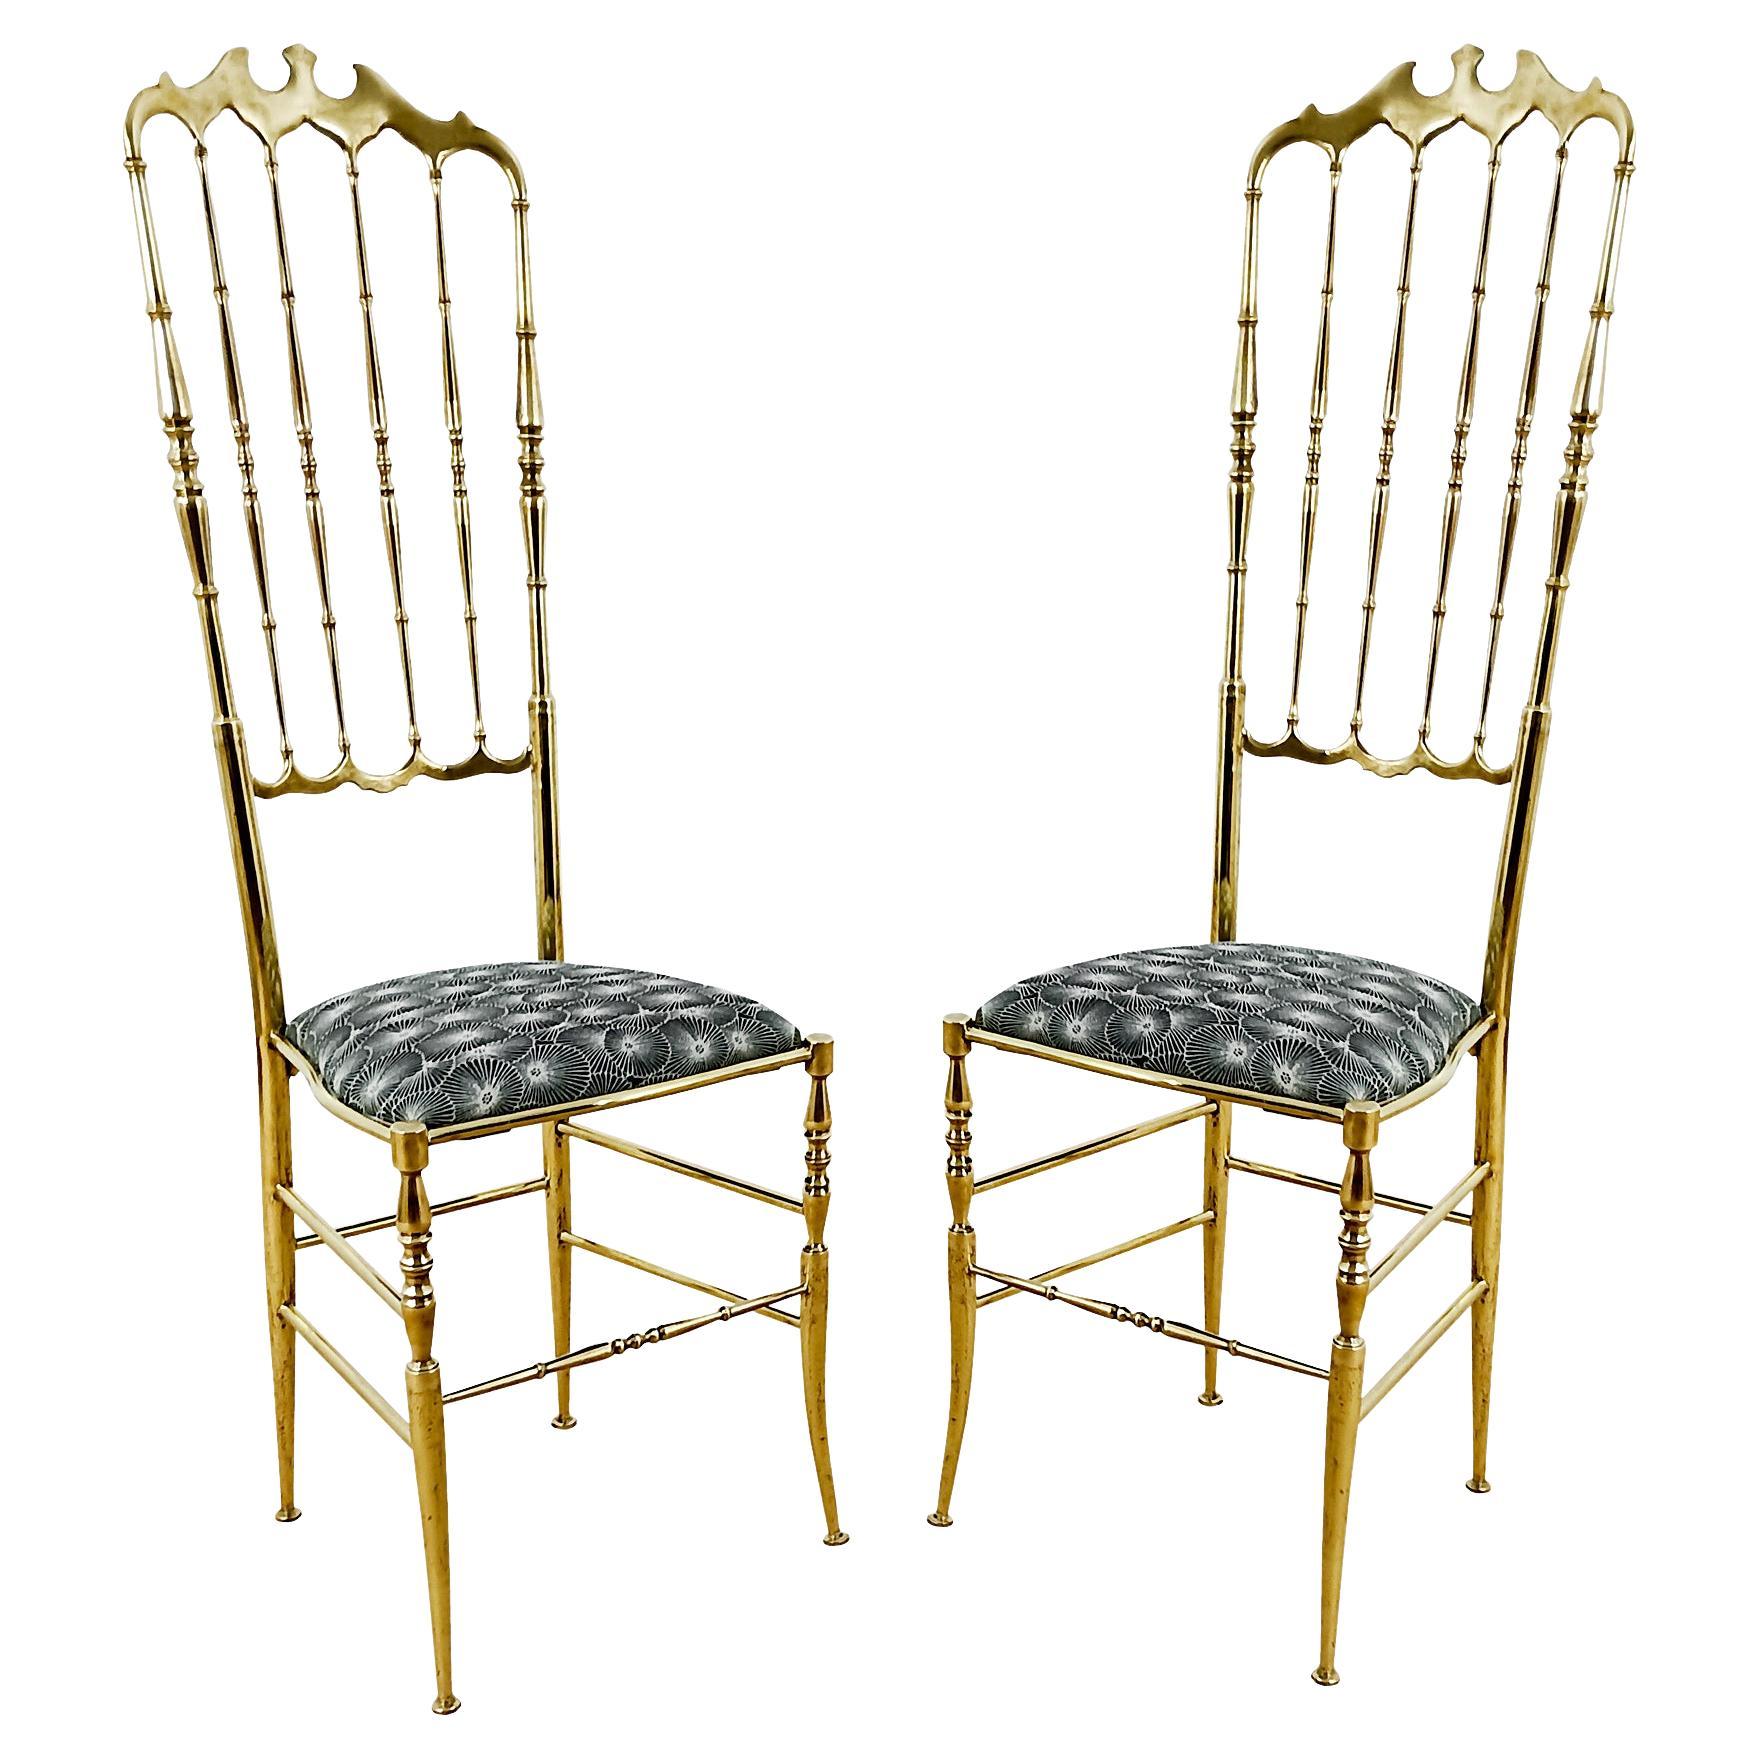 Pair of Mid-Century Modern Chiavari Chairs with Japanese Fabric, Italy, 1940 For Sale